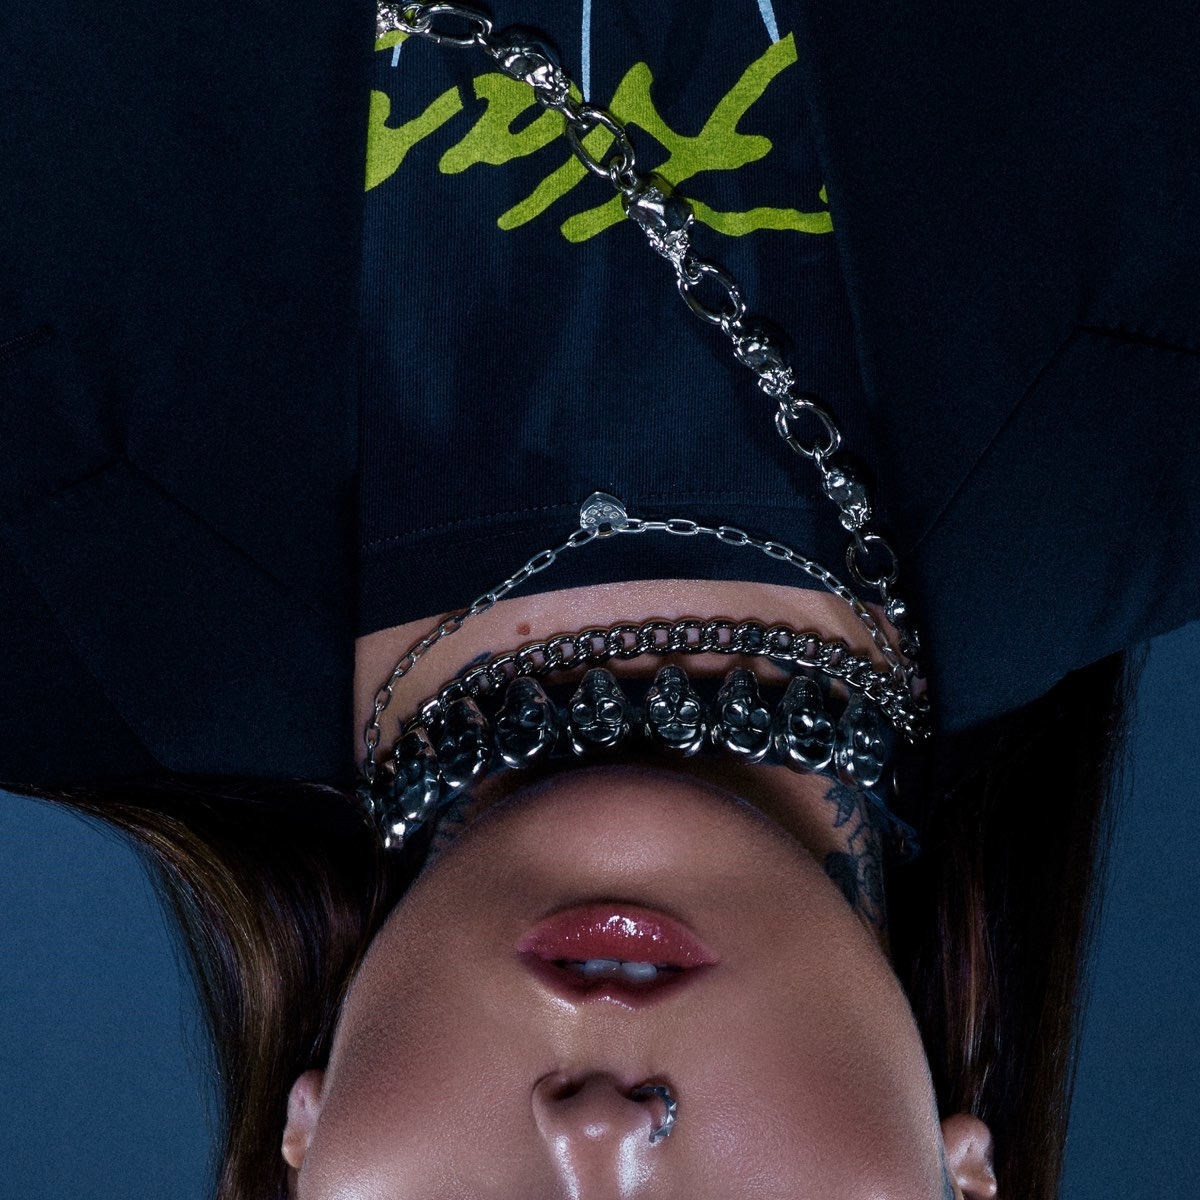 Single cover for &quot;Strangers&quot; by Kenya Grace, showing Kenya upside down